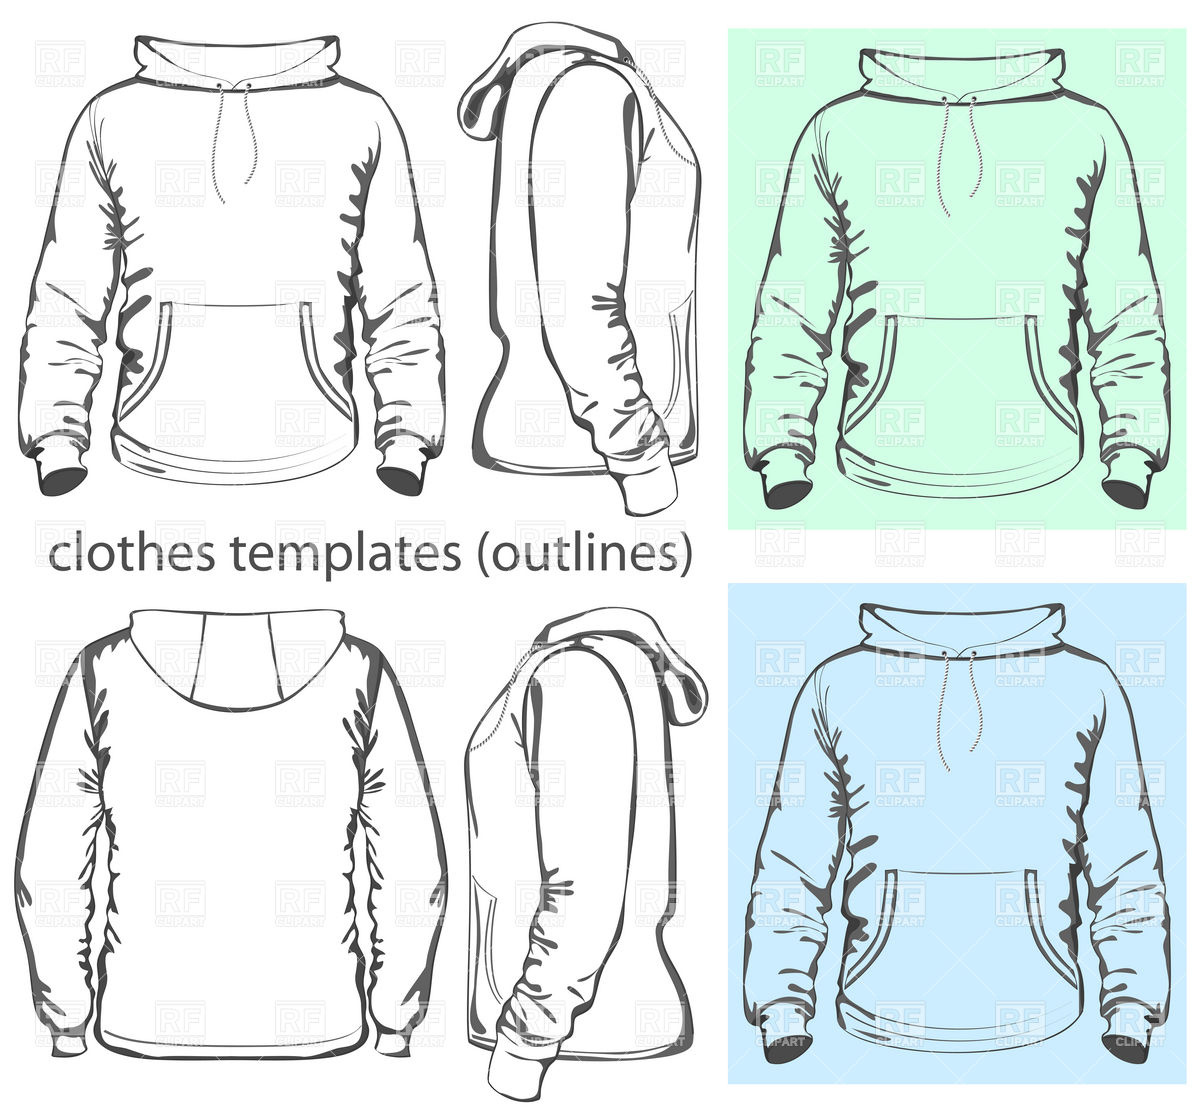 Men S Hooded Sweatshirt Template With Pocket On Belly 5084 Download